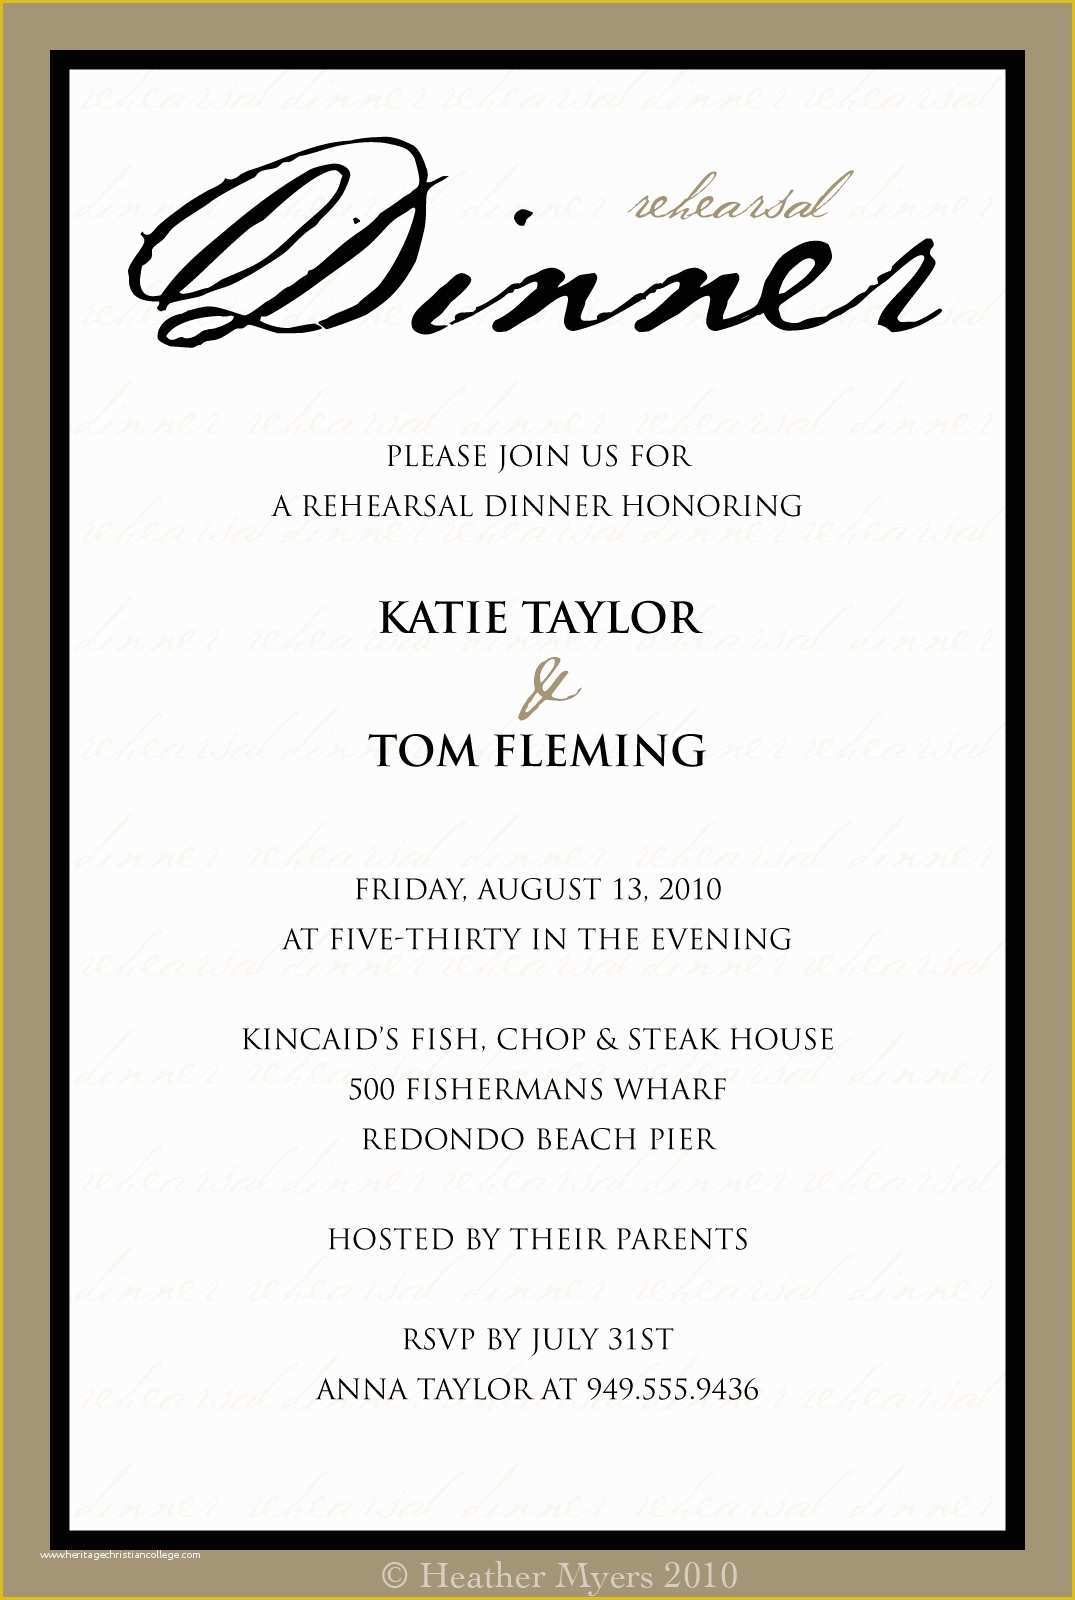 Dinner Invitation Templates Free Download Of 10 Best Of Dinner Invitation Template formal